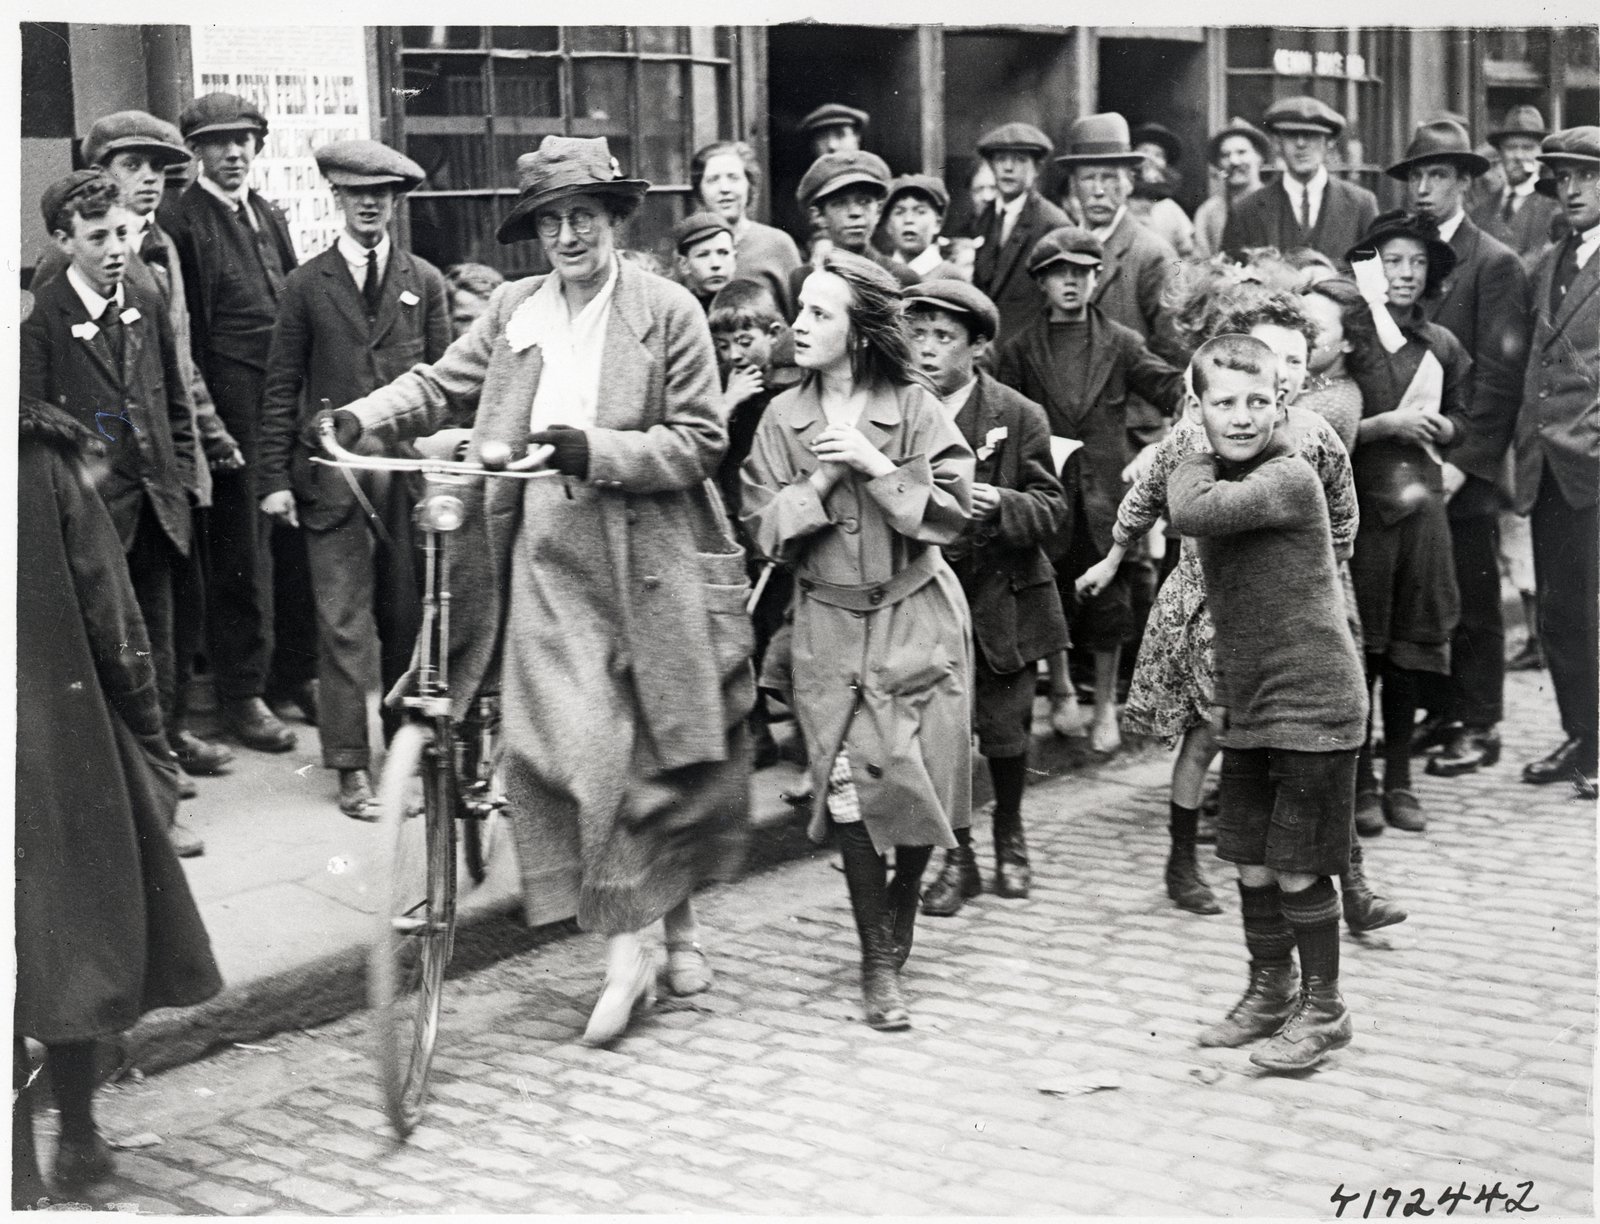 Image - Countess Markievicz toured polling stations on her bicycle - and attracted some curious young observers. Photo: Bettmann/Getty Images